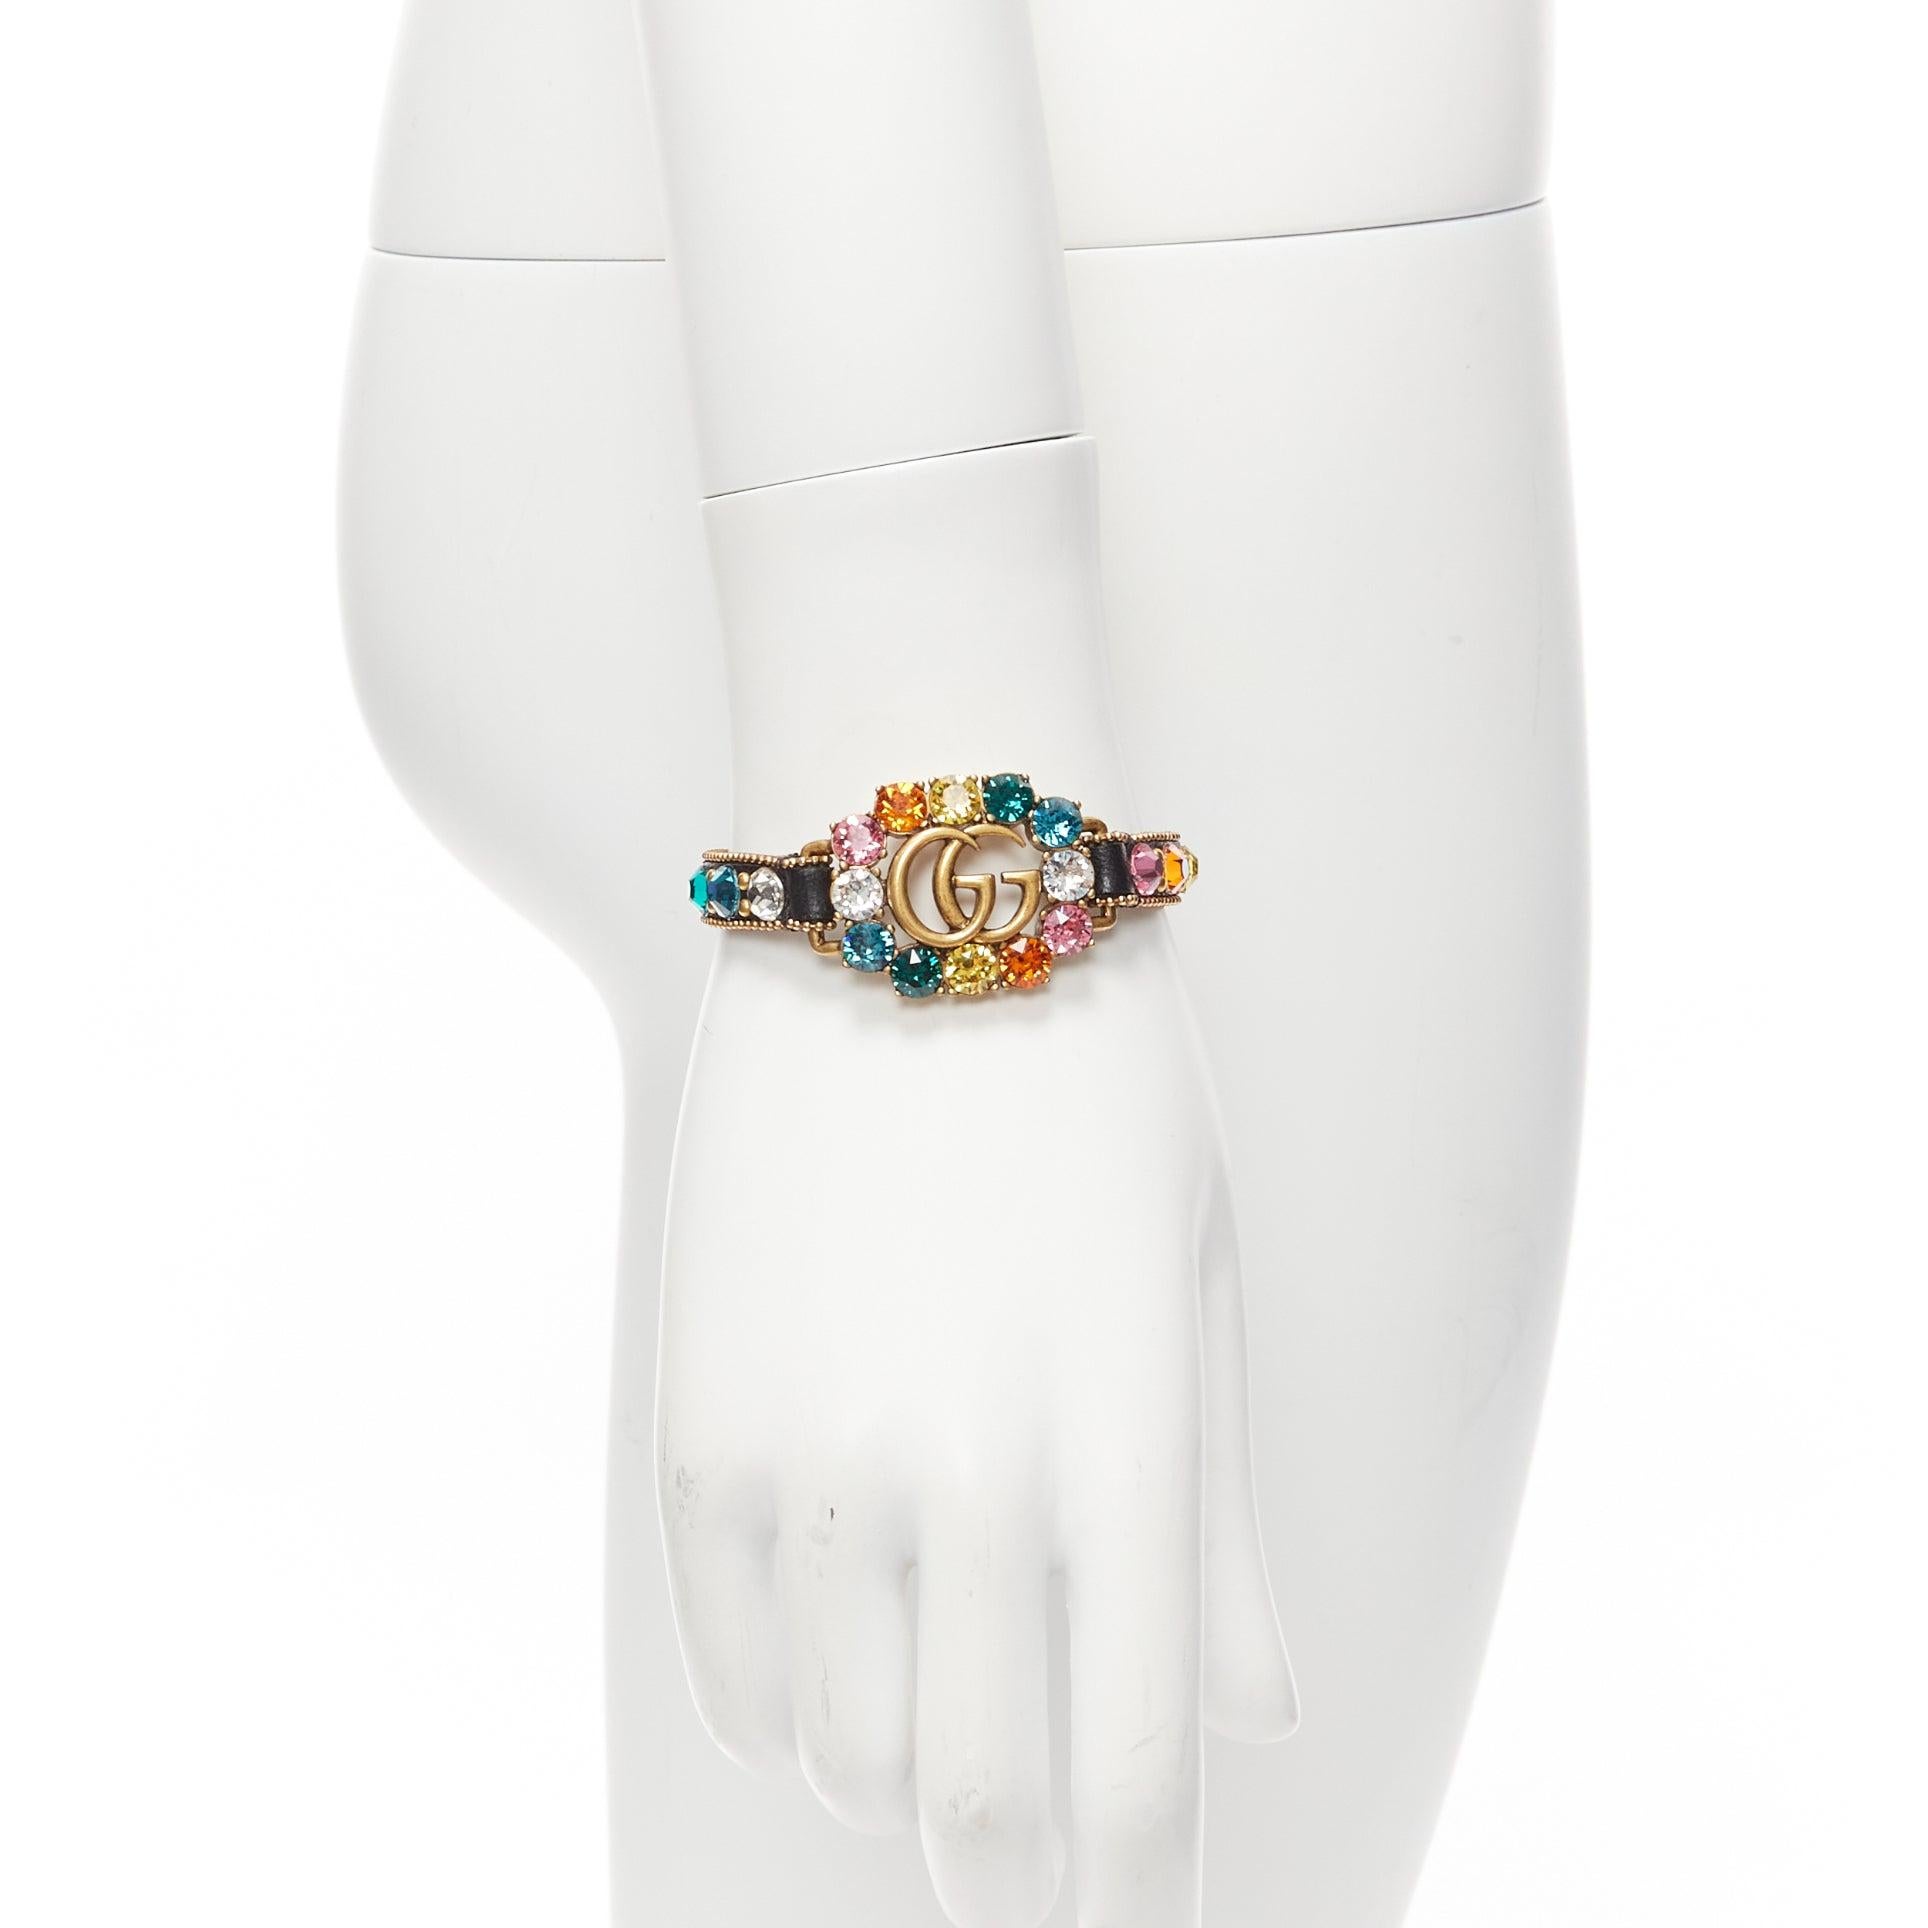 GUCCI gold GG log rainbow crystal embellished black leather bracelet
Reference: TGAS/D00986
Brand: Gucci
Designer: Alessandro Michele
Material: Leather
Color: Black, Multicolour
Pattern: Crystals
Closure: Buckle
Made in: Italy

CONDITION:
Condition: